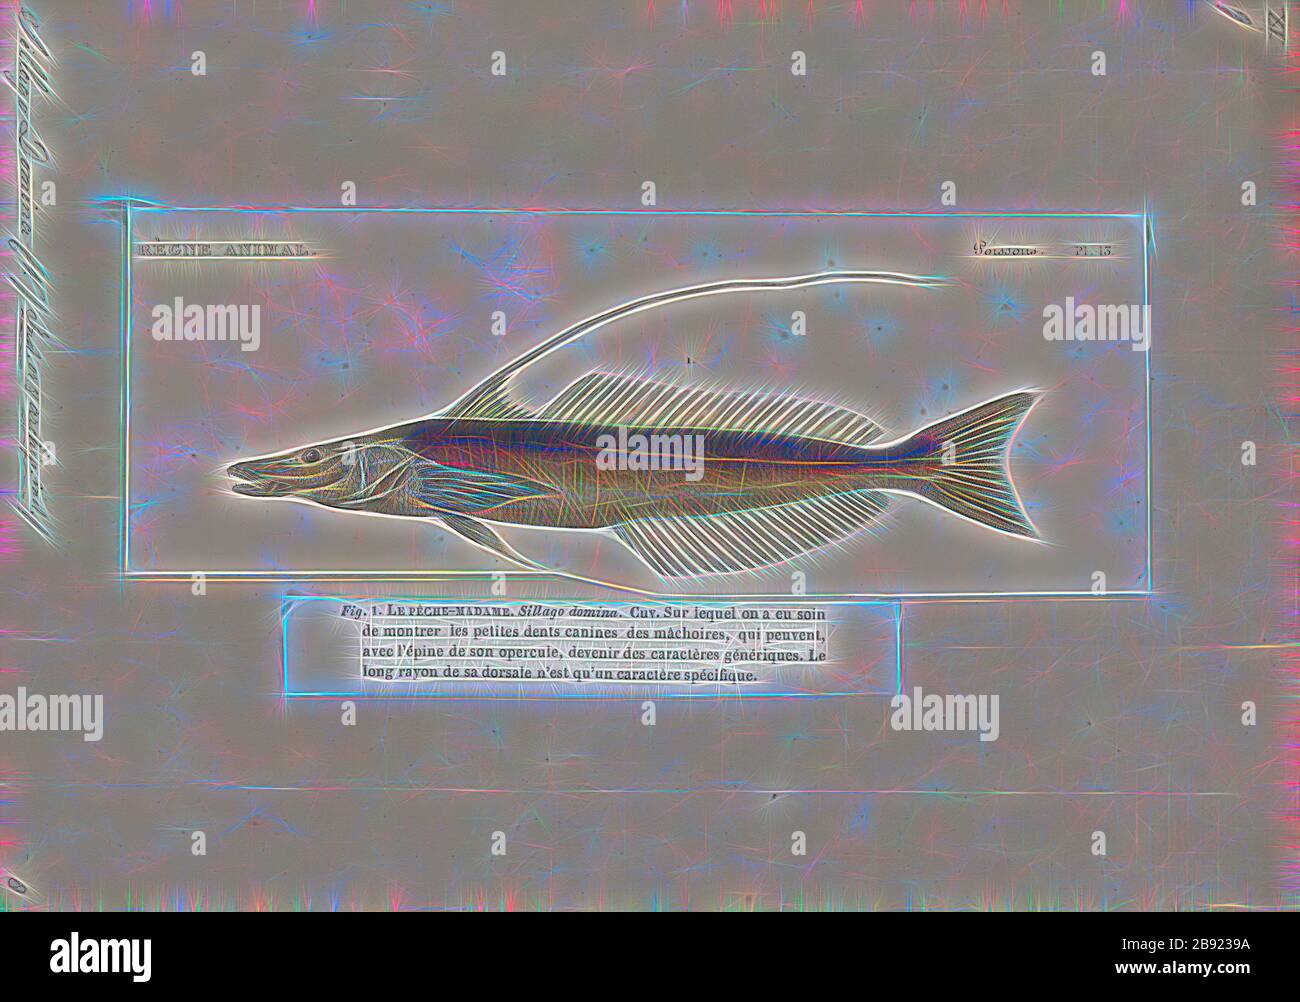 Sillago domina, Print, 1700-1880, Reimagined by Gibon, design of warm cheerful glowing of brightness and light rays radiance. Classic art reinvented with a modern twist. Photography inspired by futurism, embracing dynamic energy of modern technology, movement, speed and revolutionize culture. Stock Photo